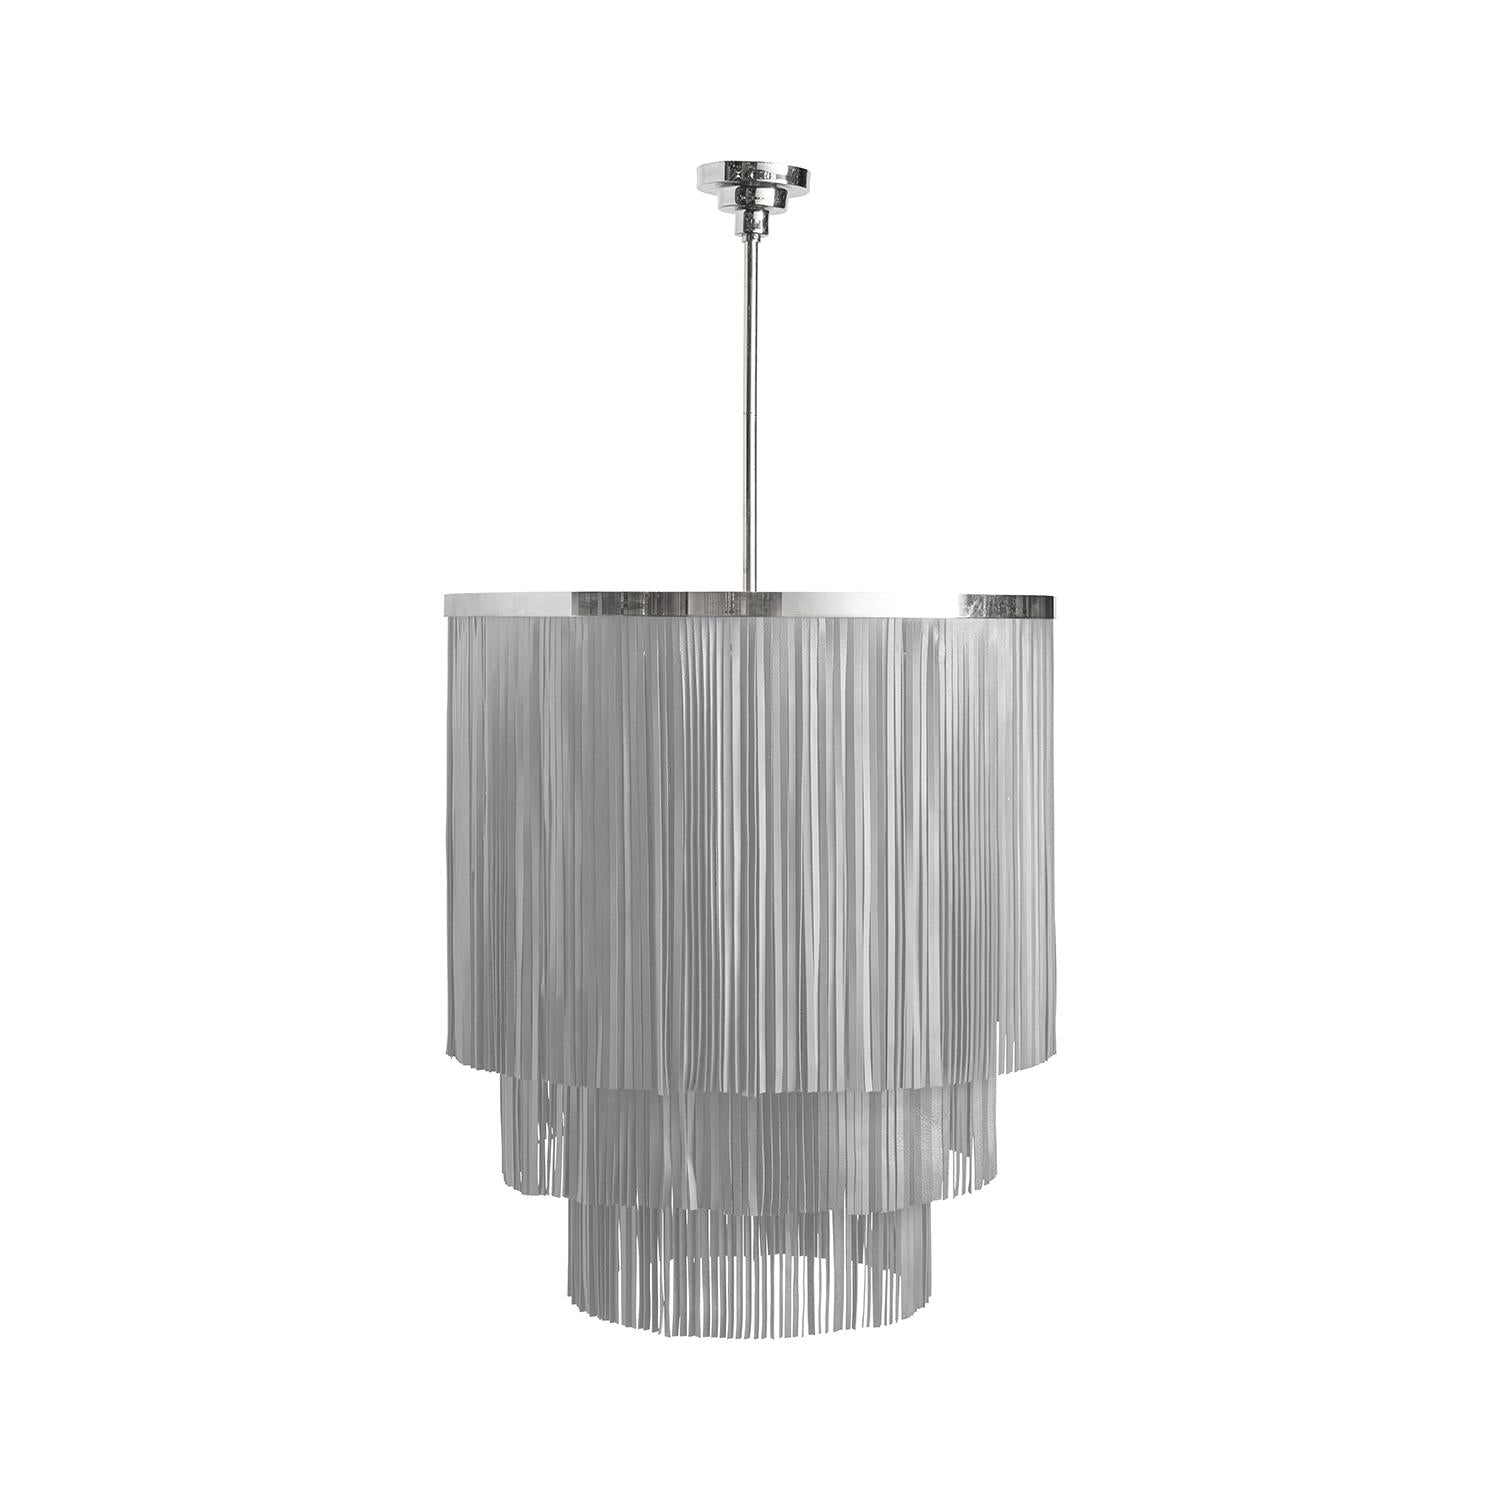 Small NeKeia Leather Chandelier in Nickel Finish and Metallic Leather